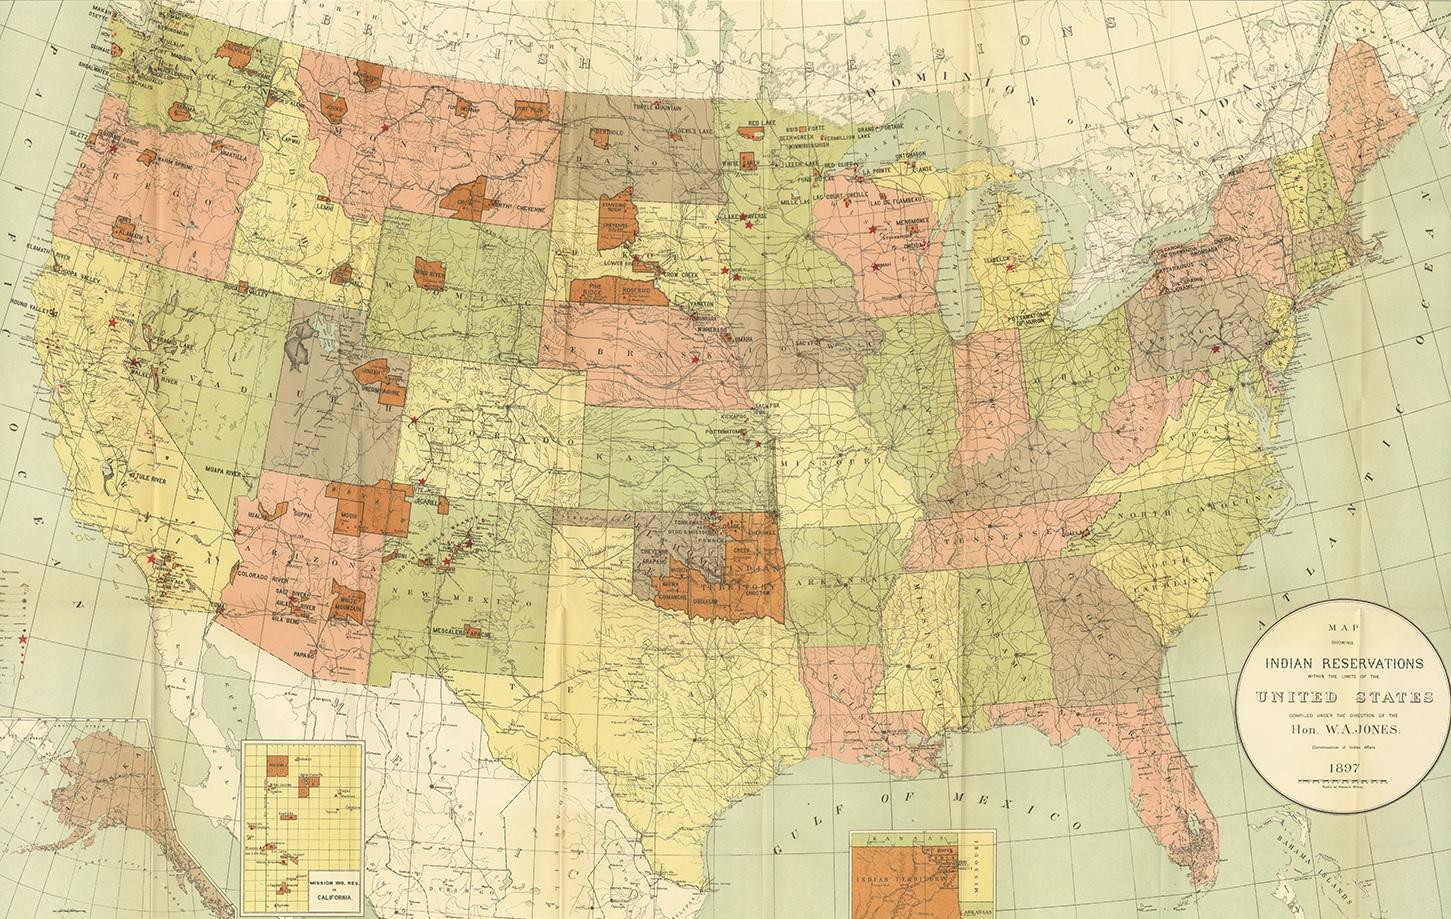 Antique map titled 'Map showing the Indian Reservations within the Limits of the United States'. Large folding map of the United States showing the Indian Reservations. The present map locates all the lands reserved to Native American Tribes as of